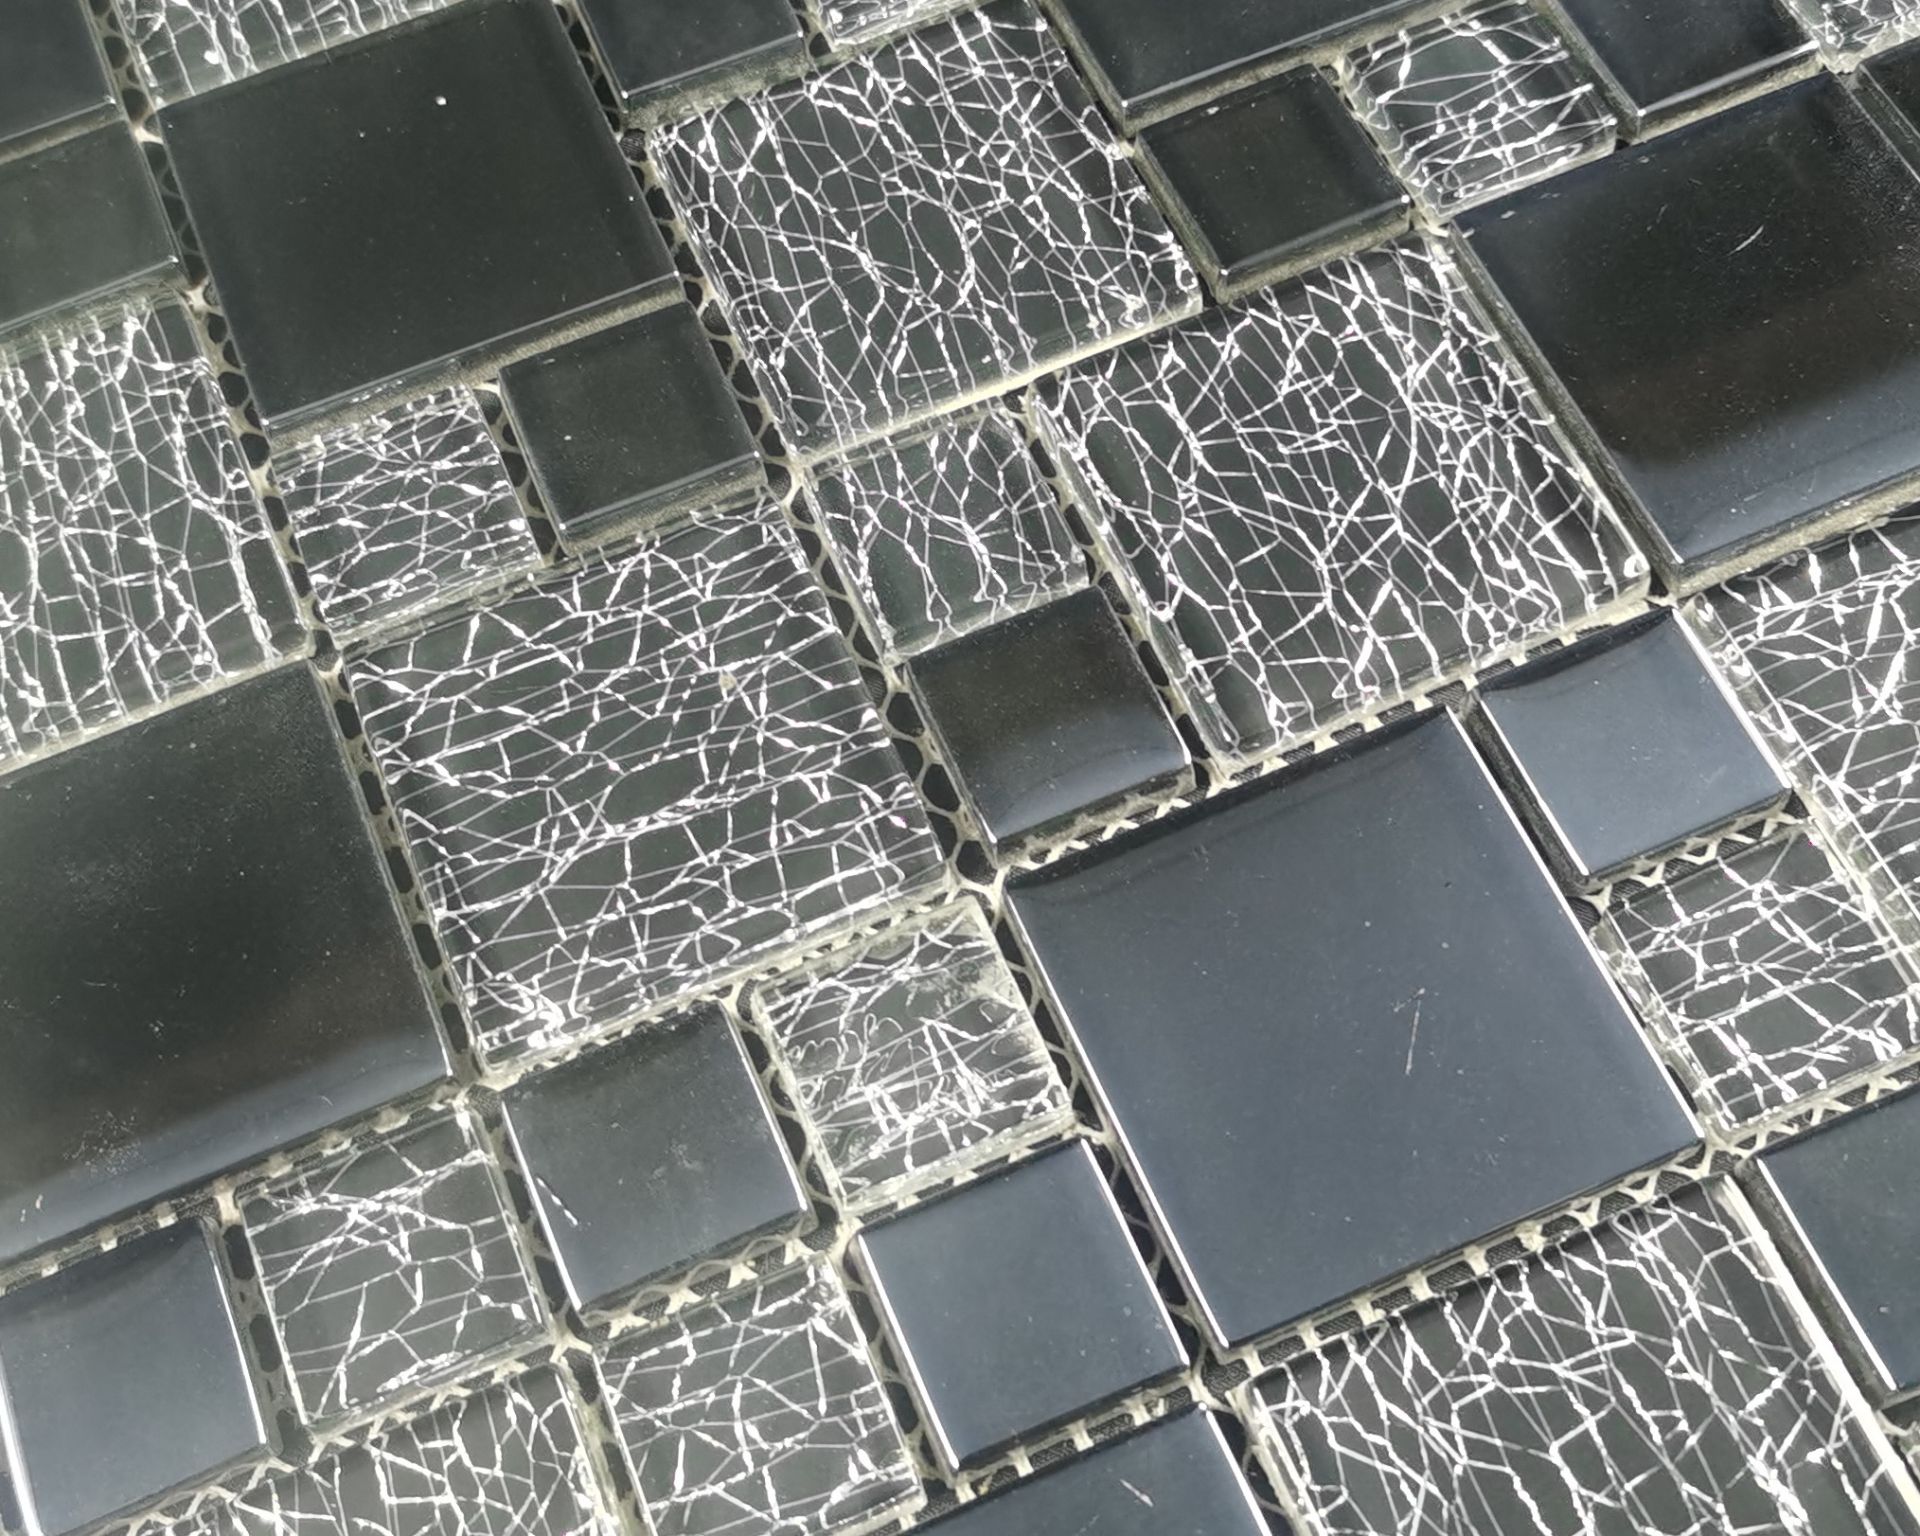 5 Square Metres - High Quality Glass/Stainless Steel Mosaic Tiles-55 sheets - Image 4 of 5